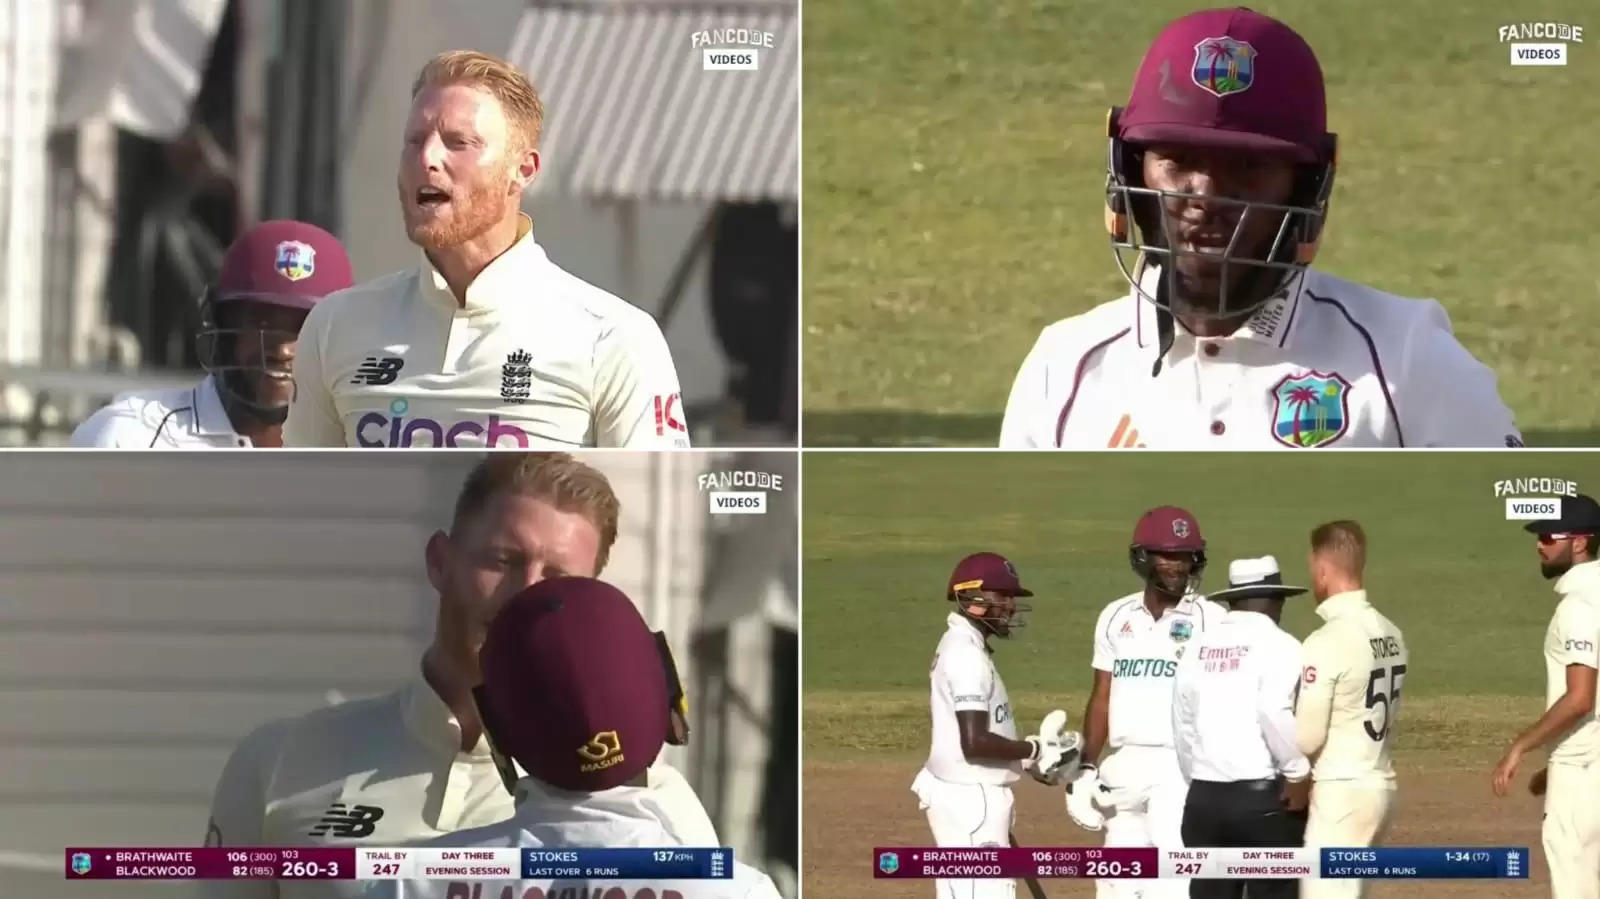 WATCH: Ben Stokes and Jermaine Blackwood engage in war of words; umpire separates pair